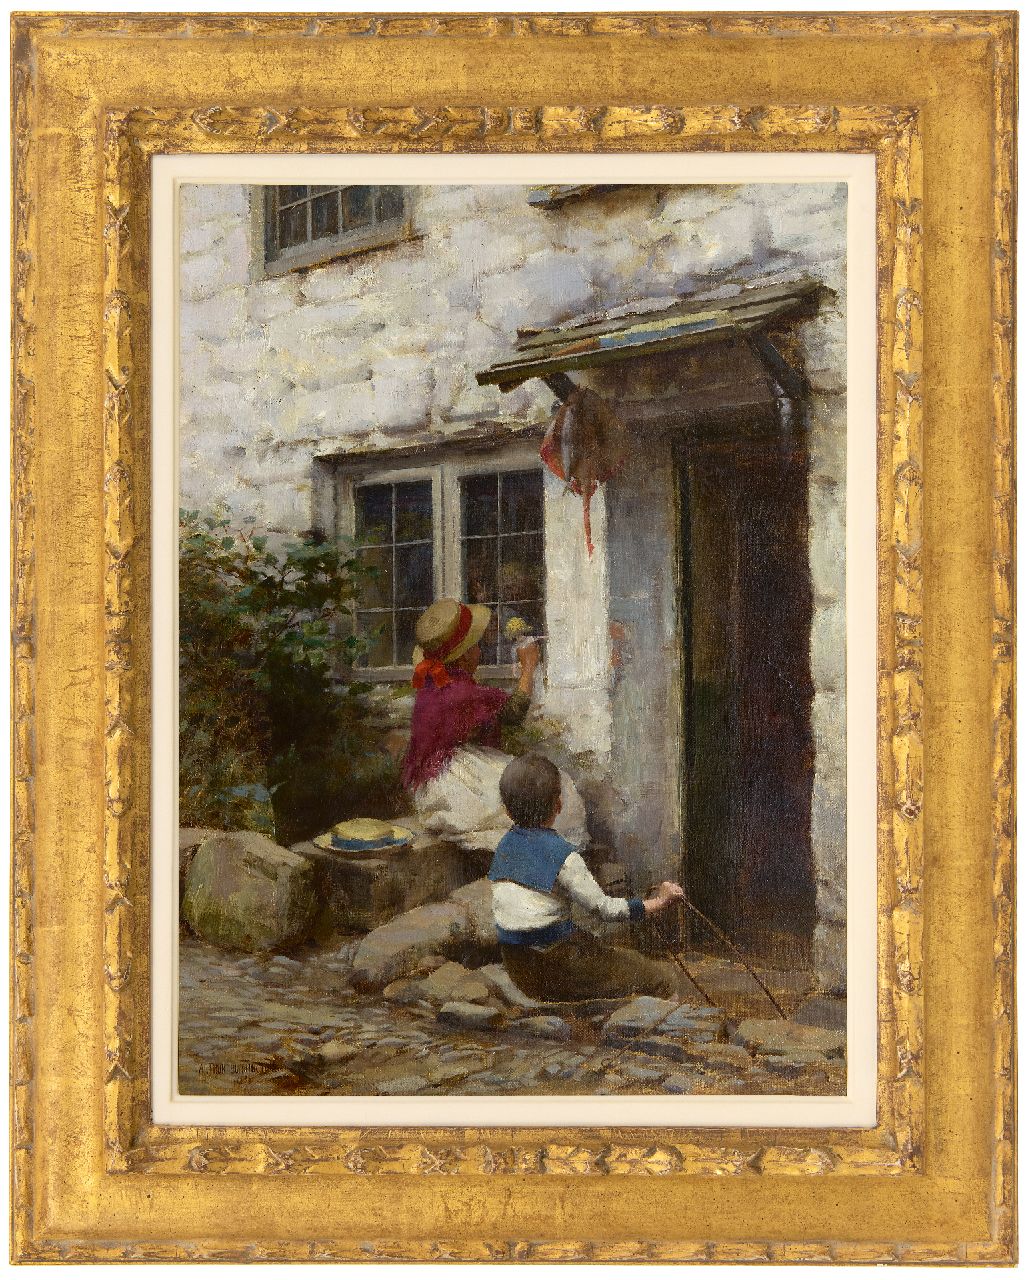 Burrington A.A.  | Arthur Alfred Burrington | Paintings offered for sale | Through the Window Pane, oil on canvas 44.5 x 33.2 cm, signed l.l. and dated 1888